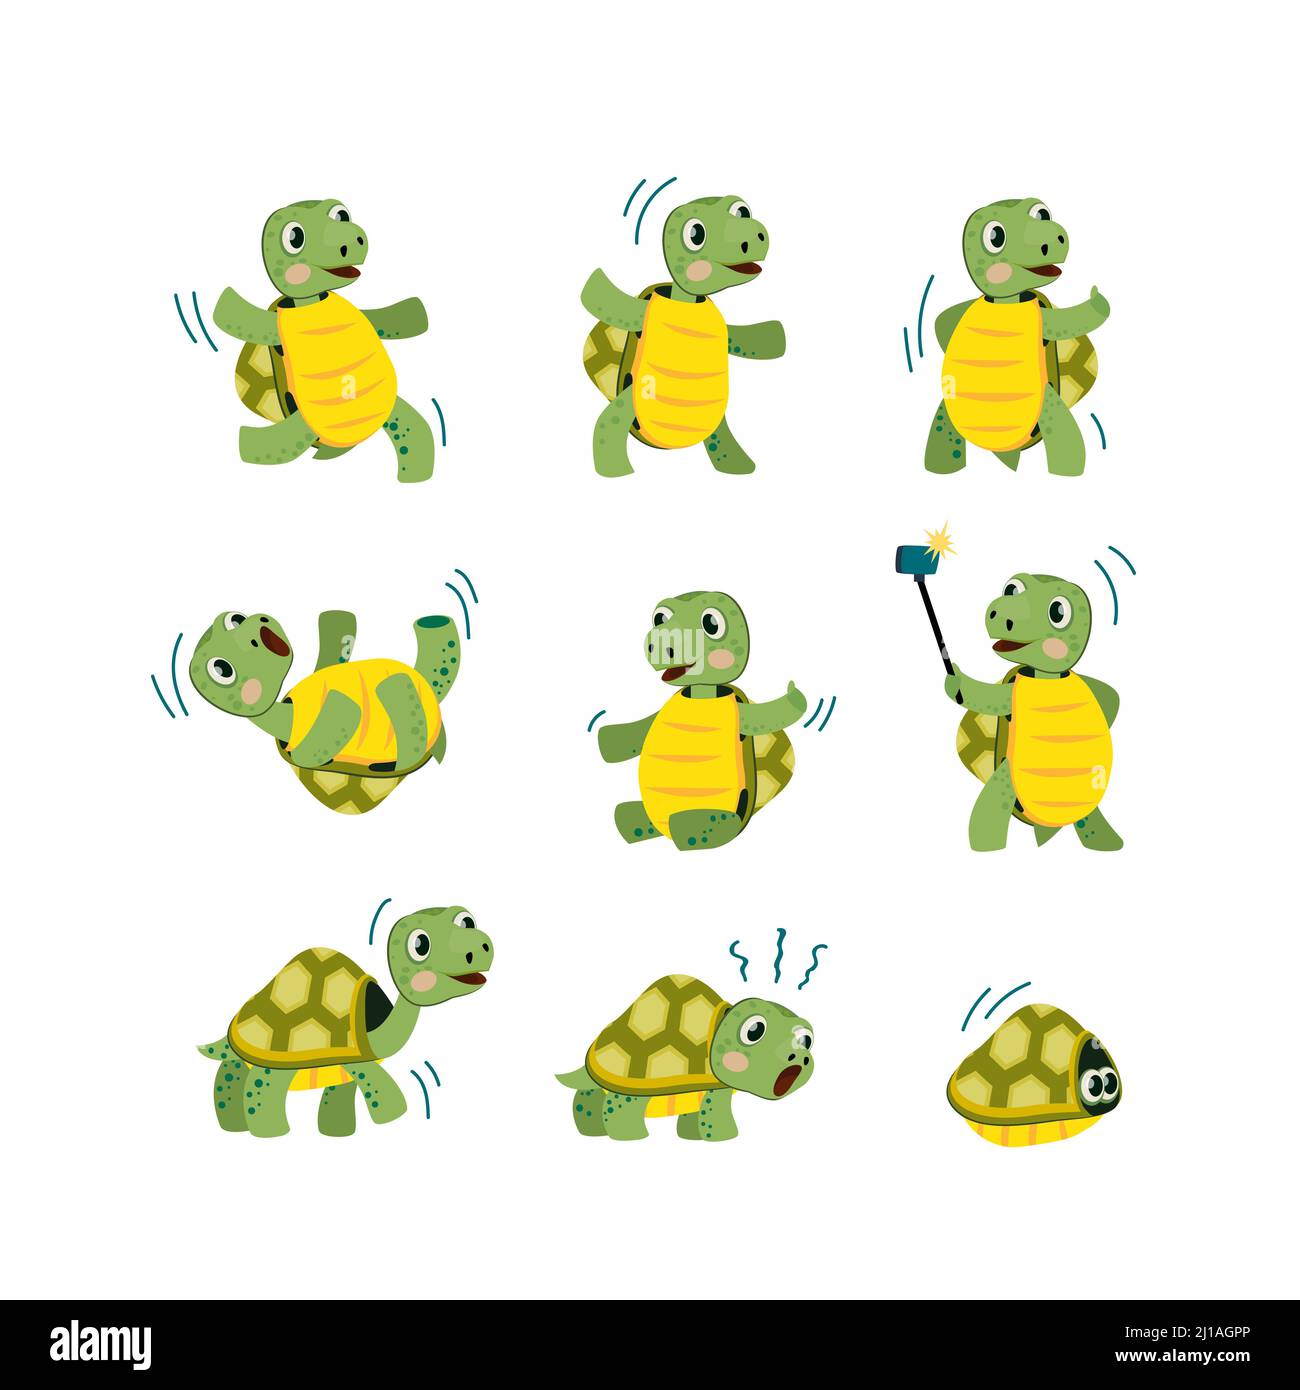 Cute little turtle flat icon set. Cartoon smiling animal character dancing, walking and having fun isolated vector illustration collection. Mascot and Stock Vector